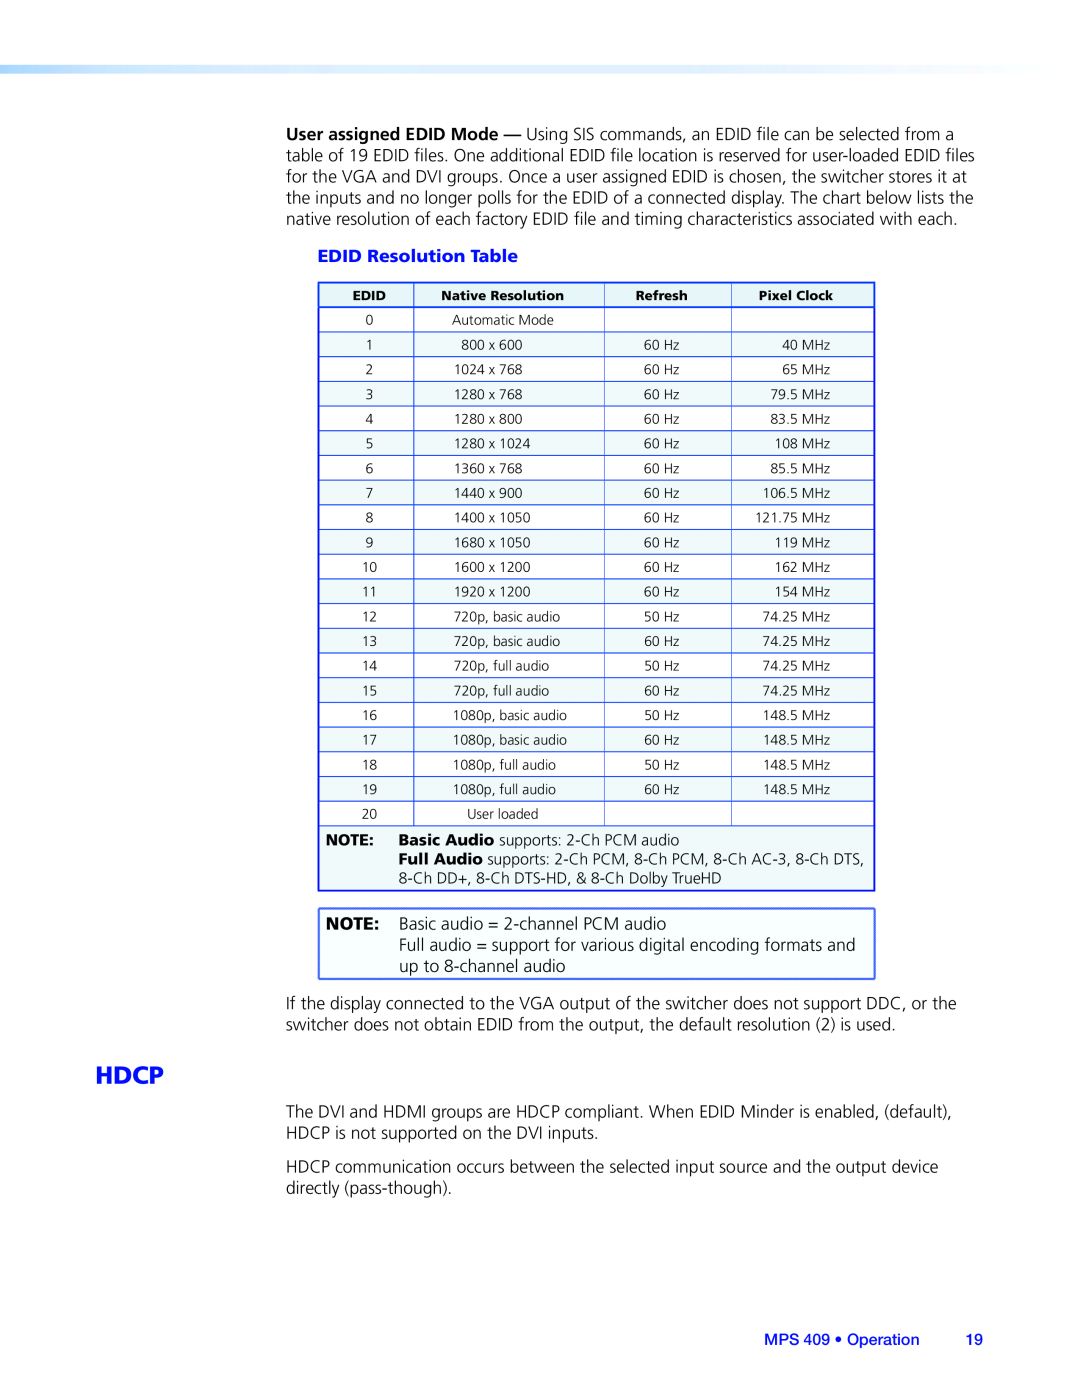 Extron electronic MPS 409 manual Hdcp, EDID Resolution Table 